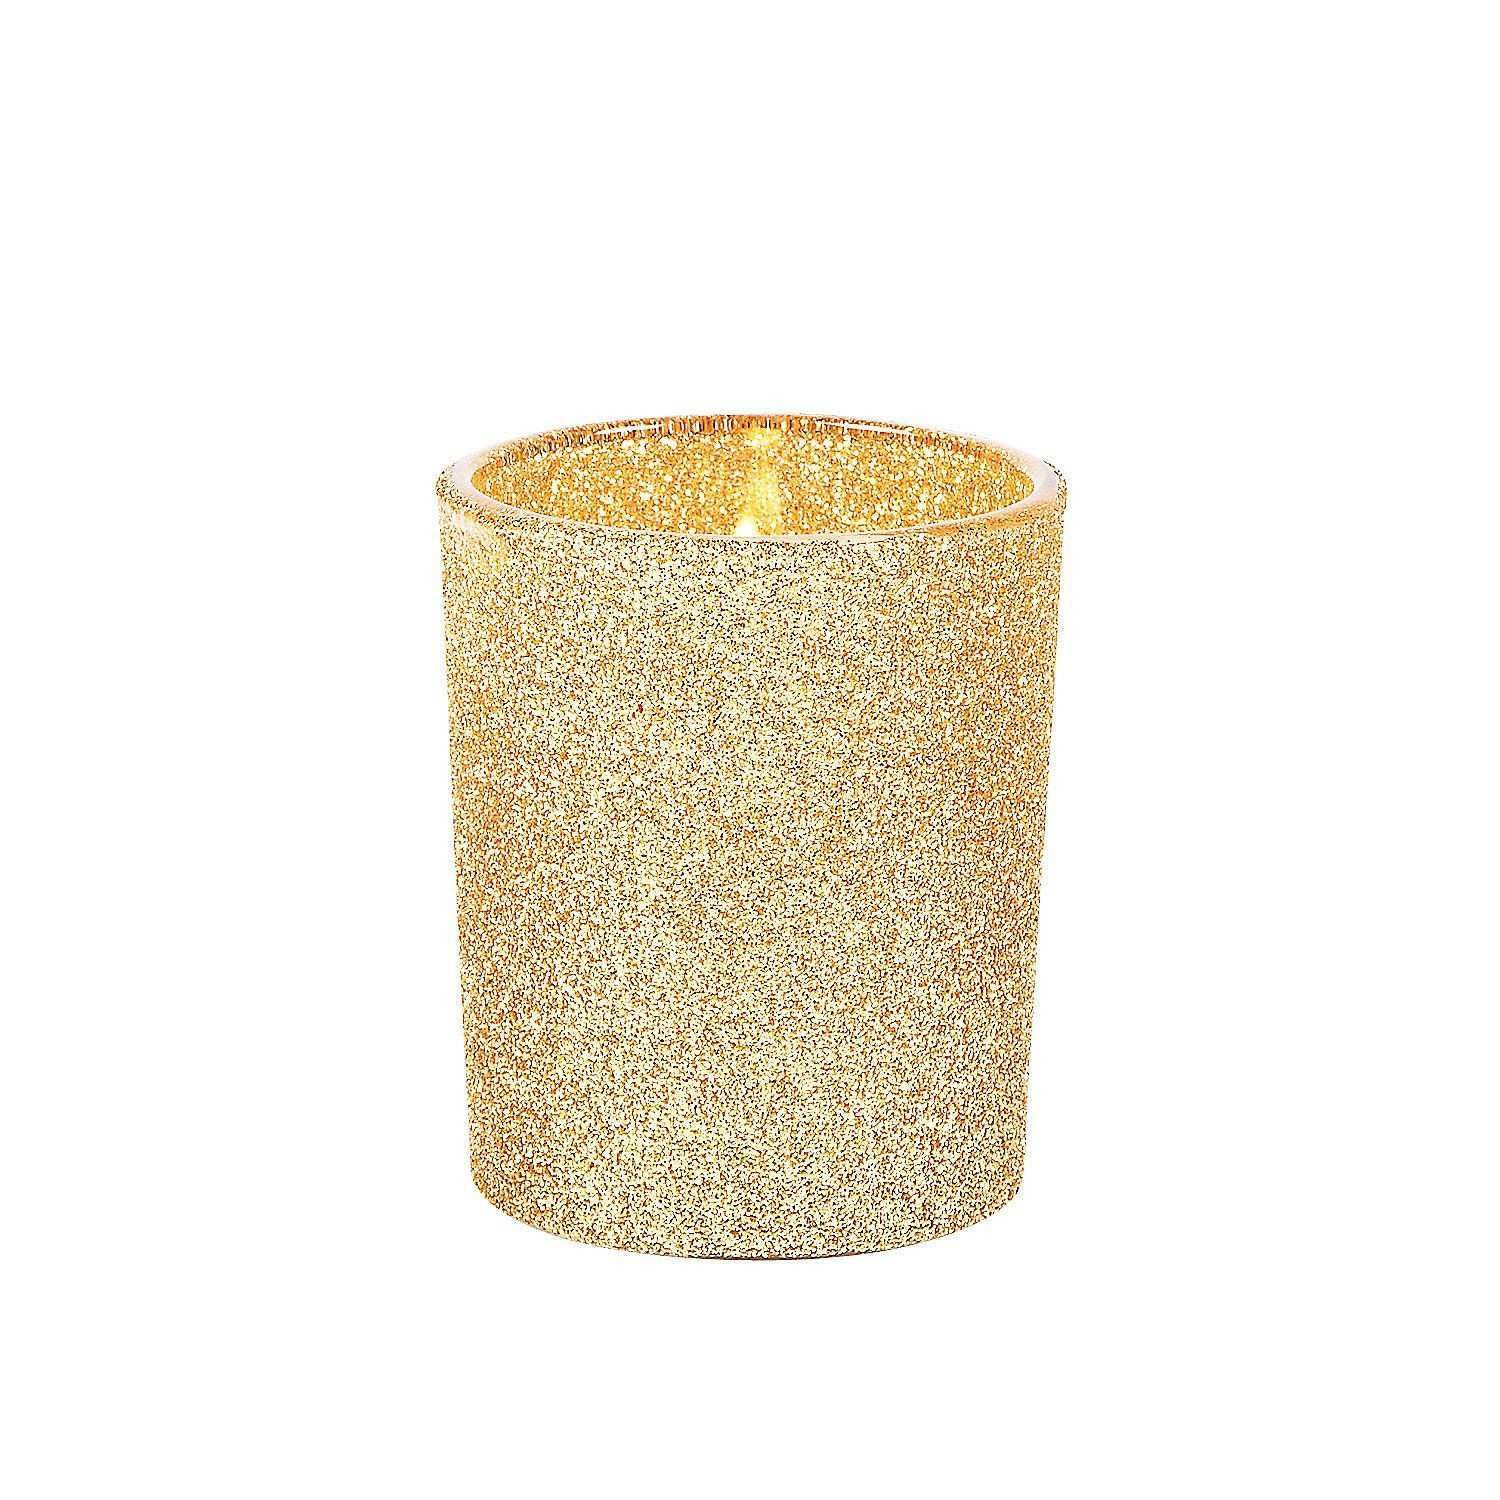 20 Great Tall Glass Hurricane Vase 2024 free download tall glass hurricane vase of gold mercury glass vases awesome inspiration gold votive candles intended for gold mercury glass vases awesome inspiration gold votive candles with gold glitter 